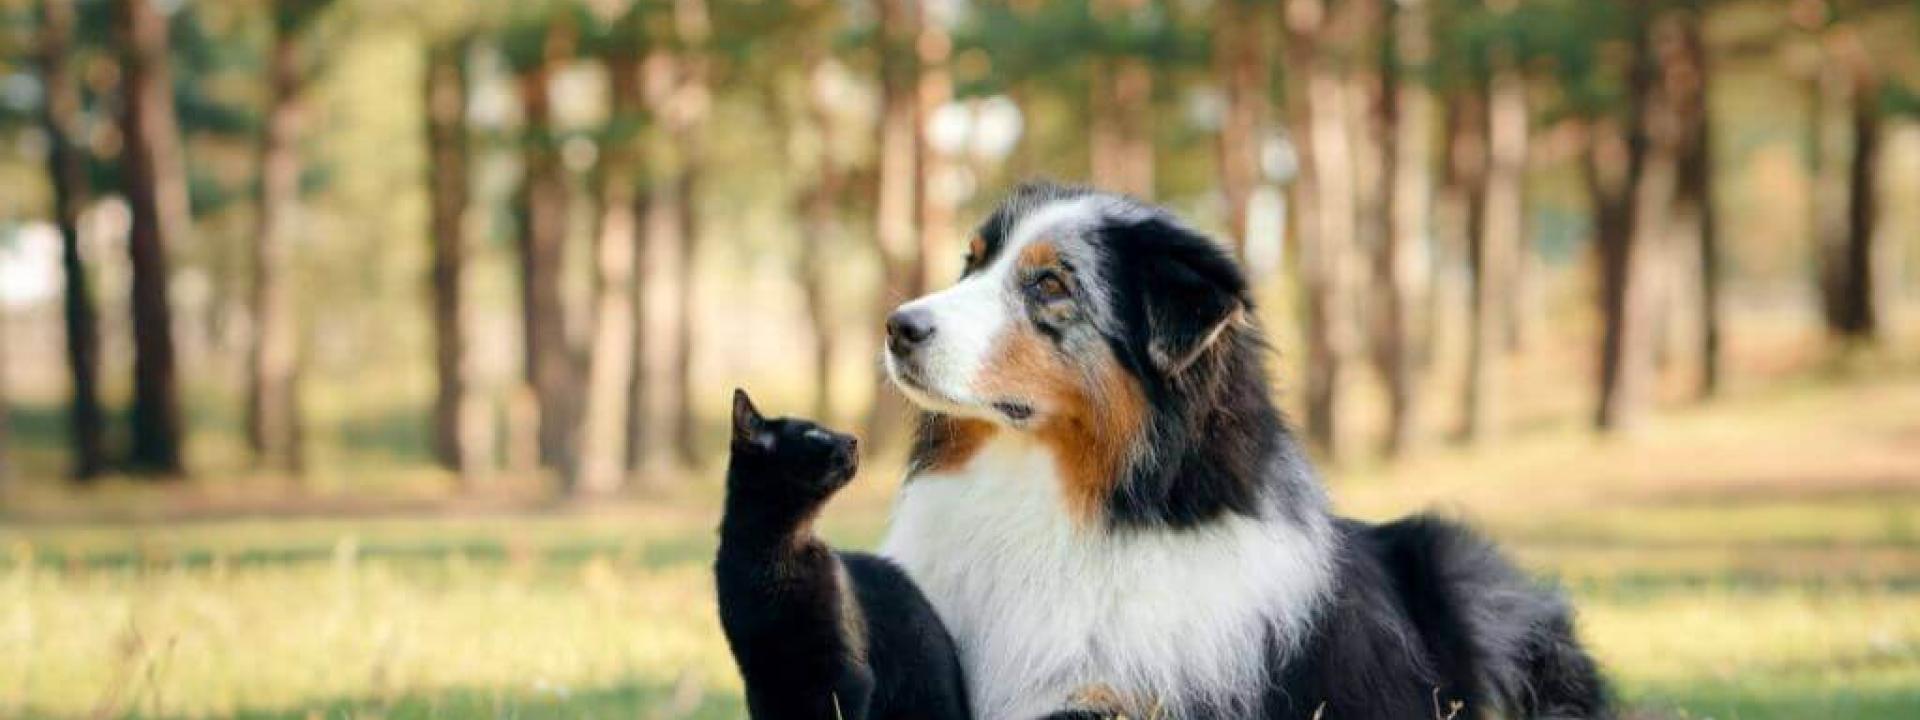 ways cats and dogs tell us they're in pain